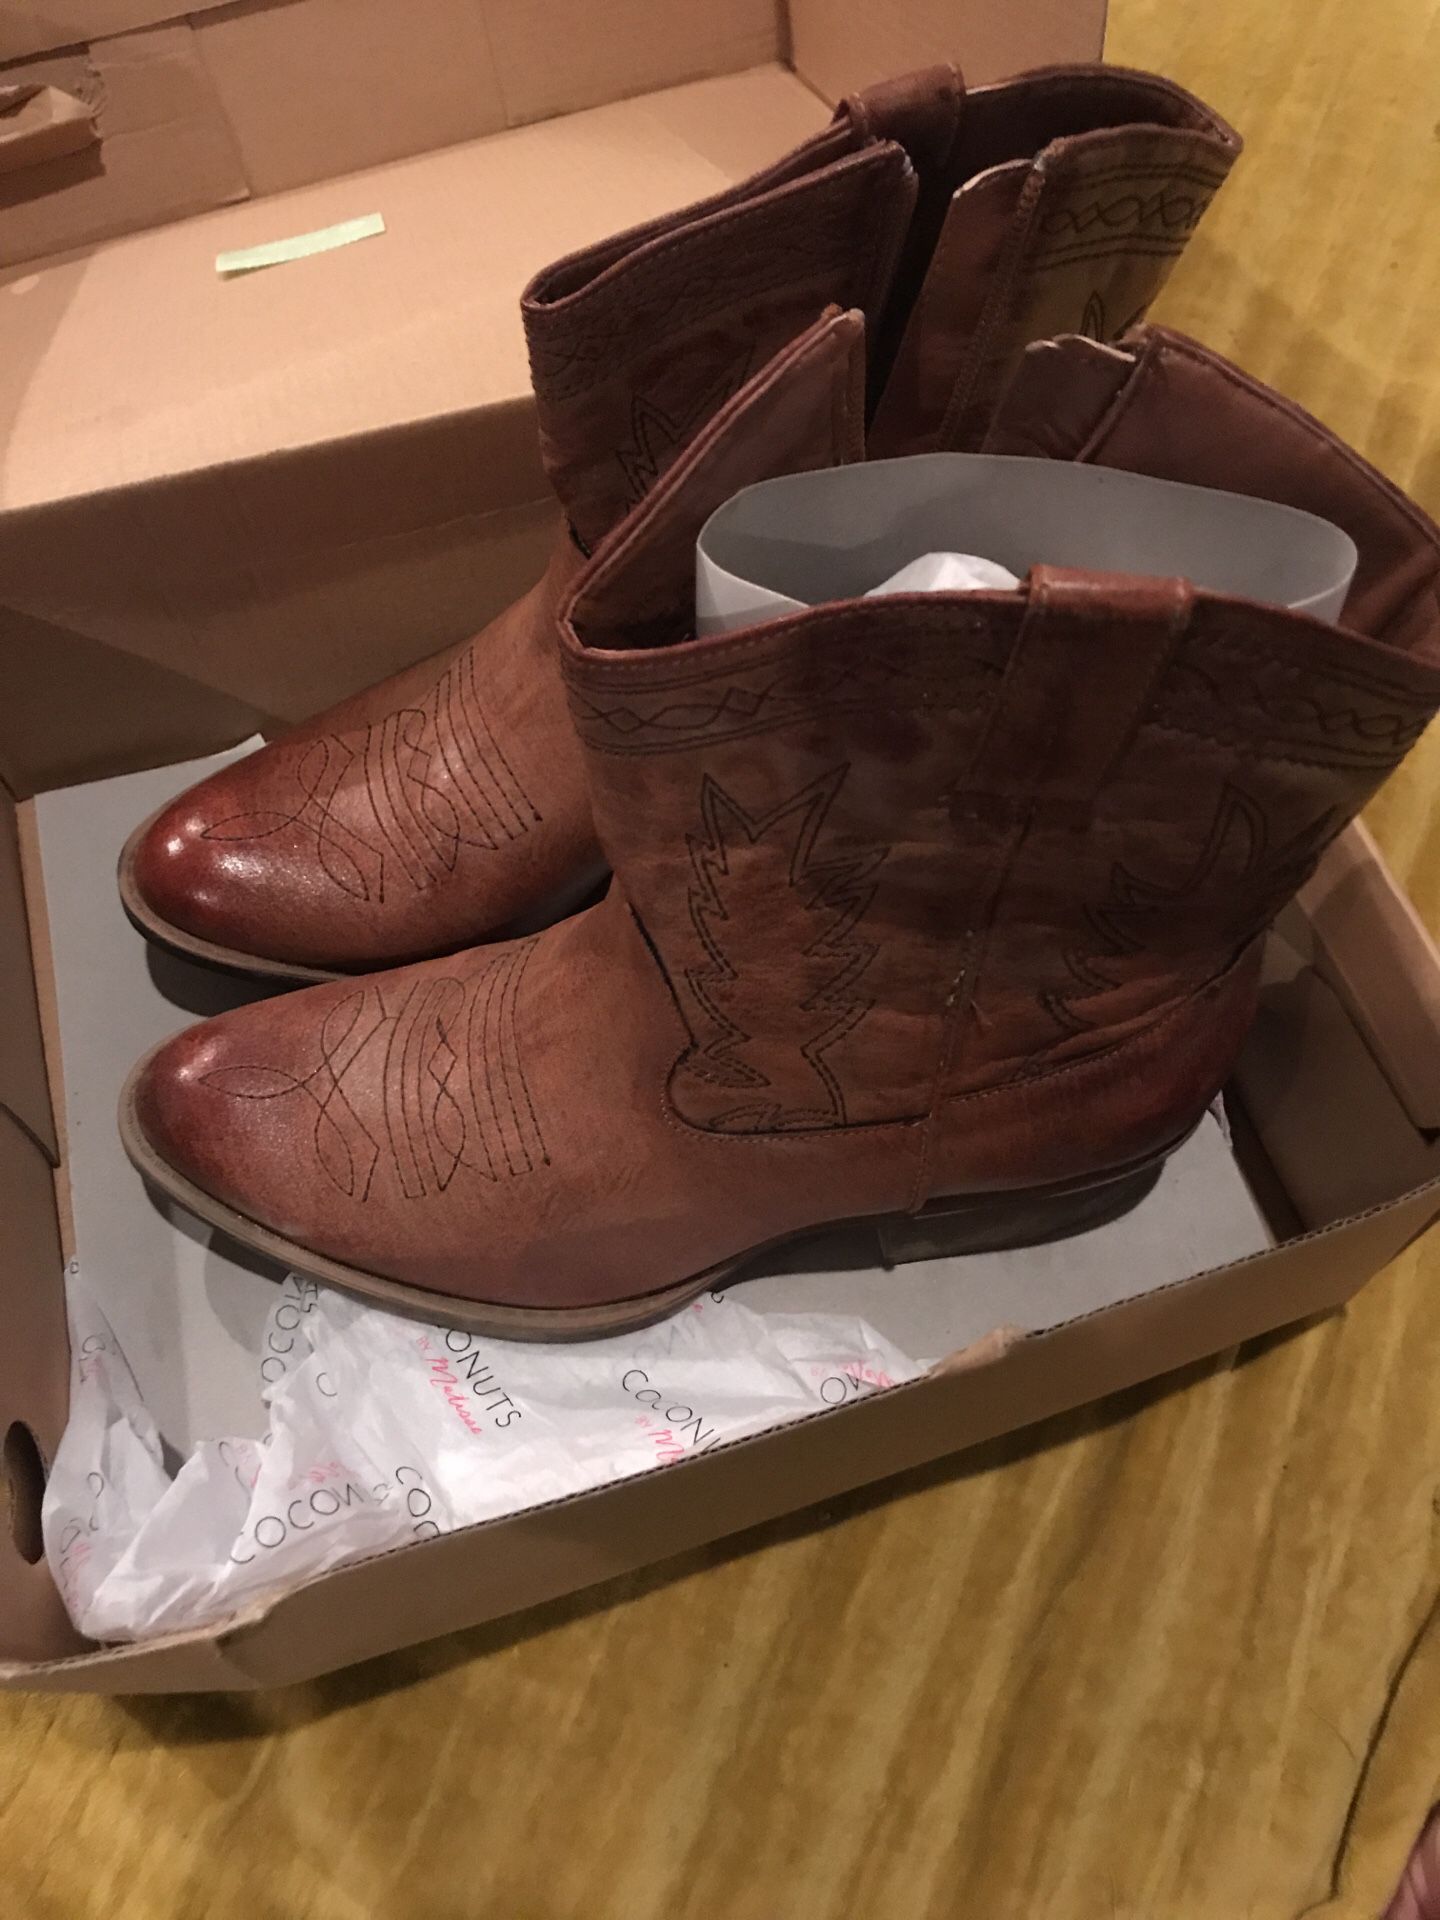 SIZE 8 WOMENS COWBOY BOOTS